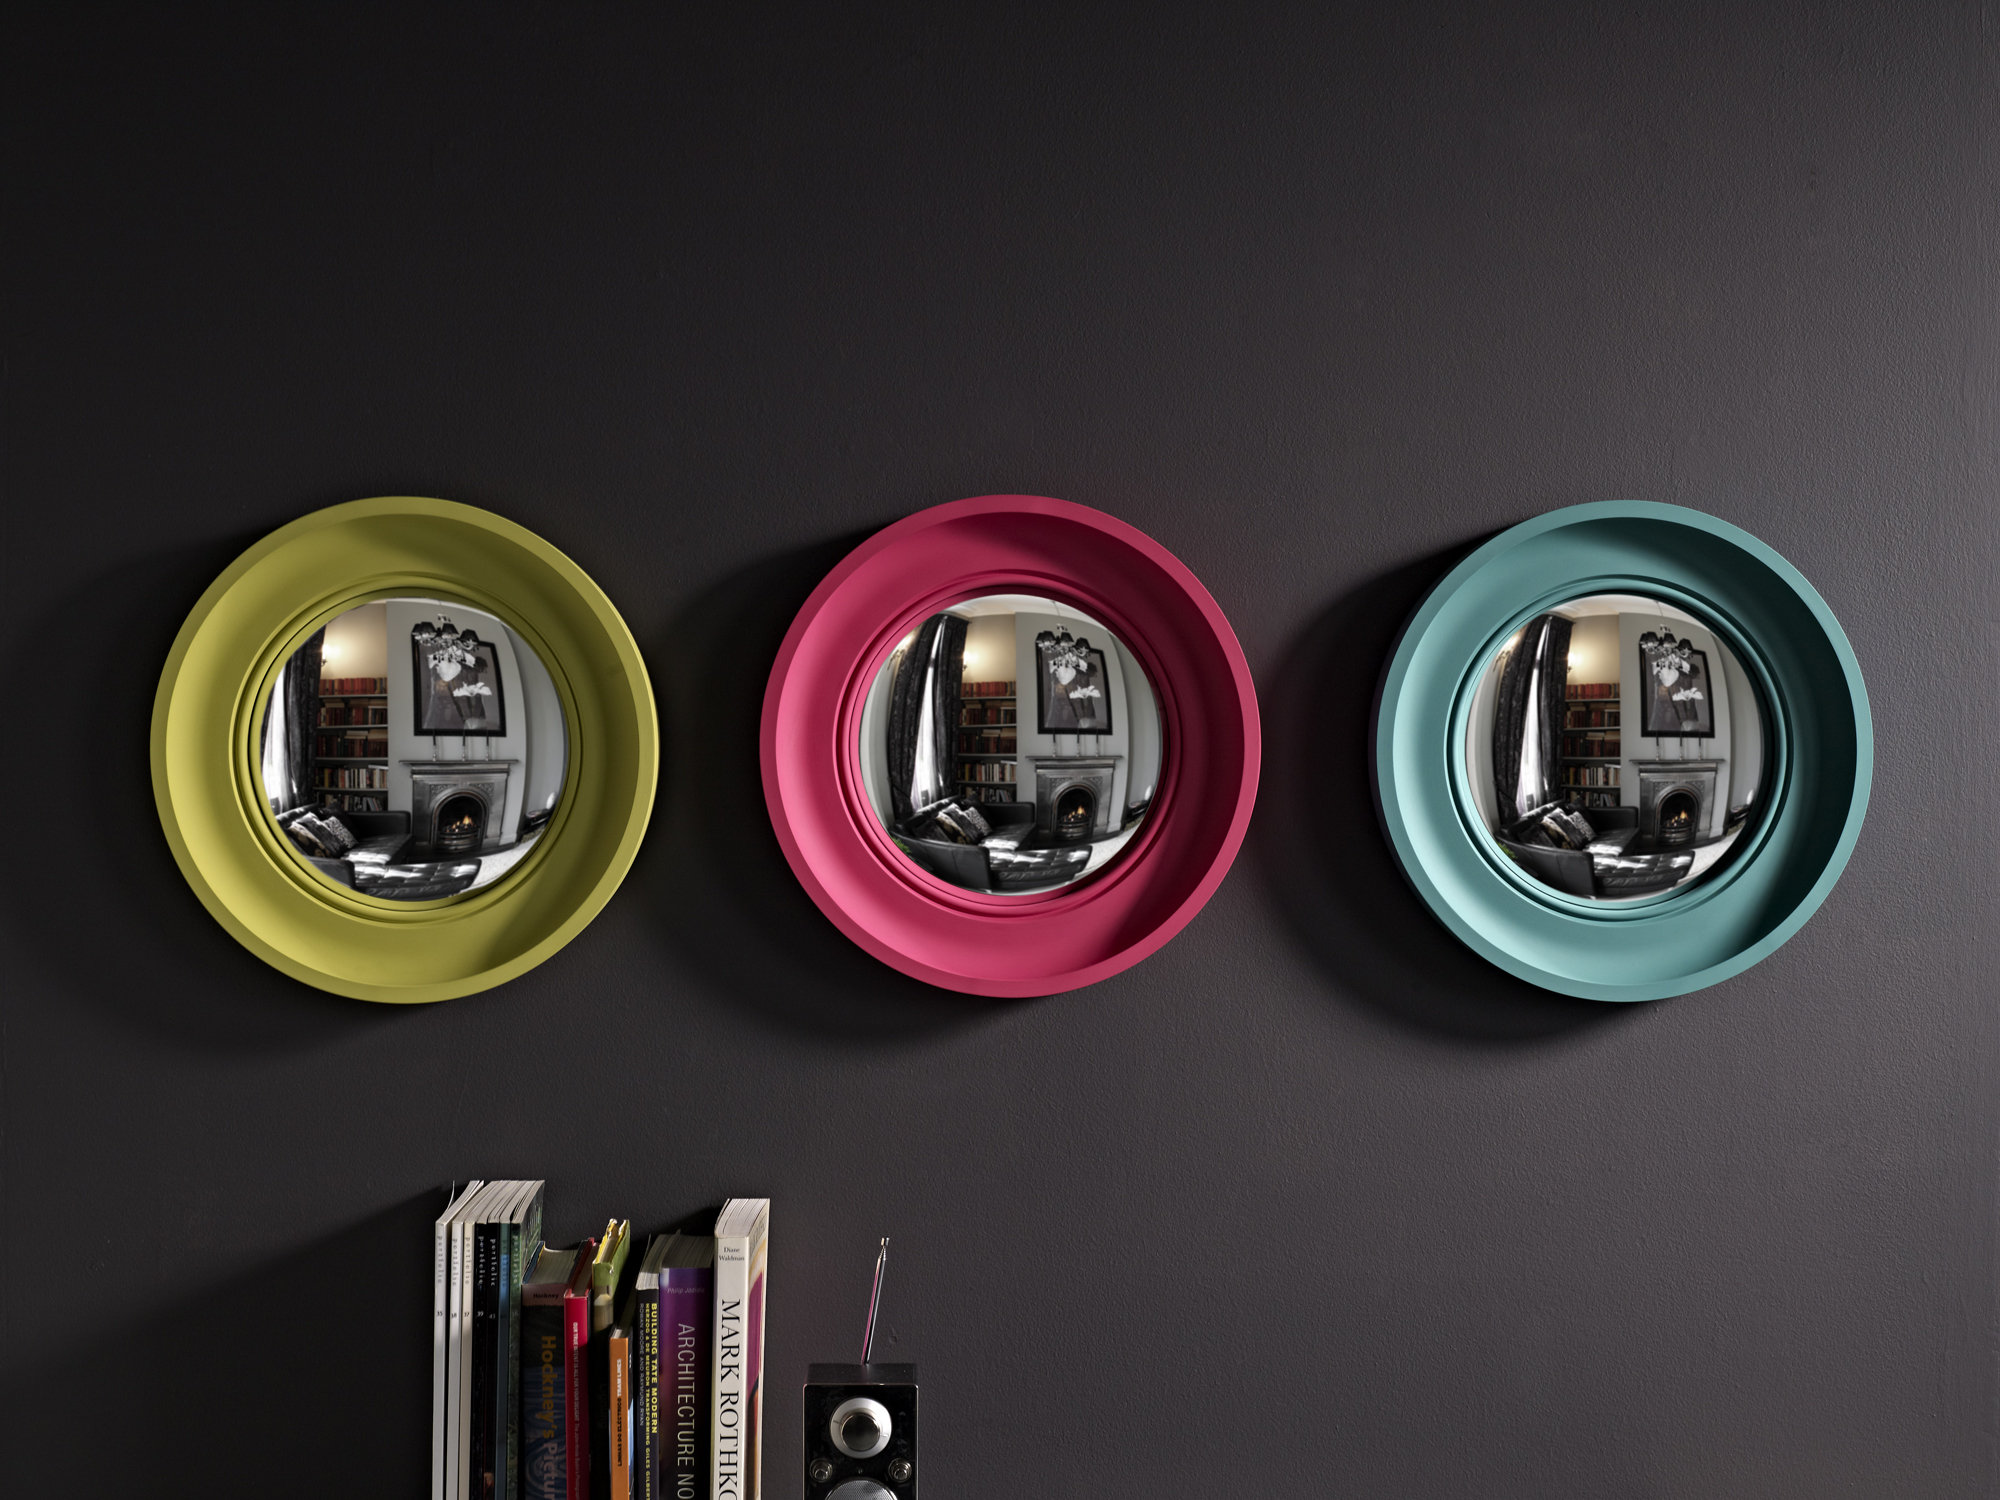 Small Cavetto round convex mirrors, in palest lime, fuchsia & teal